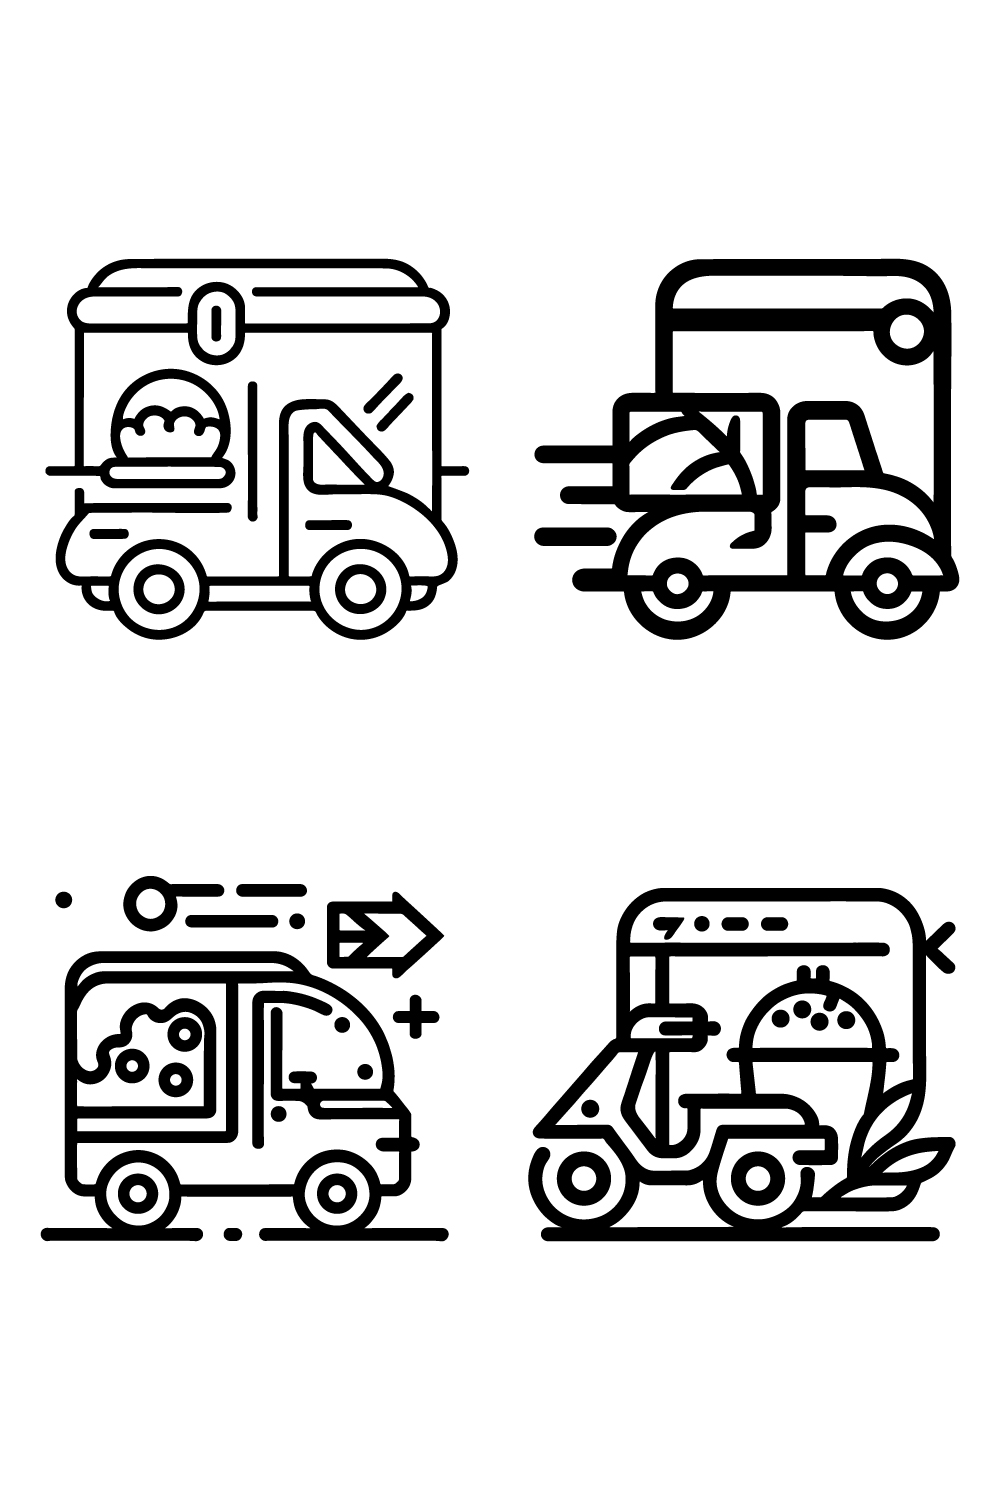 Food Delivery Icon set, line art Black And White food delivery service vector icons, Outline style, and a clean simple design isolated on white background pinterest preview image.